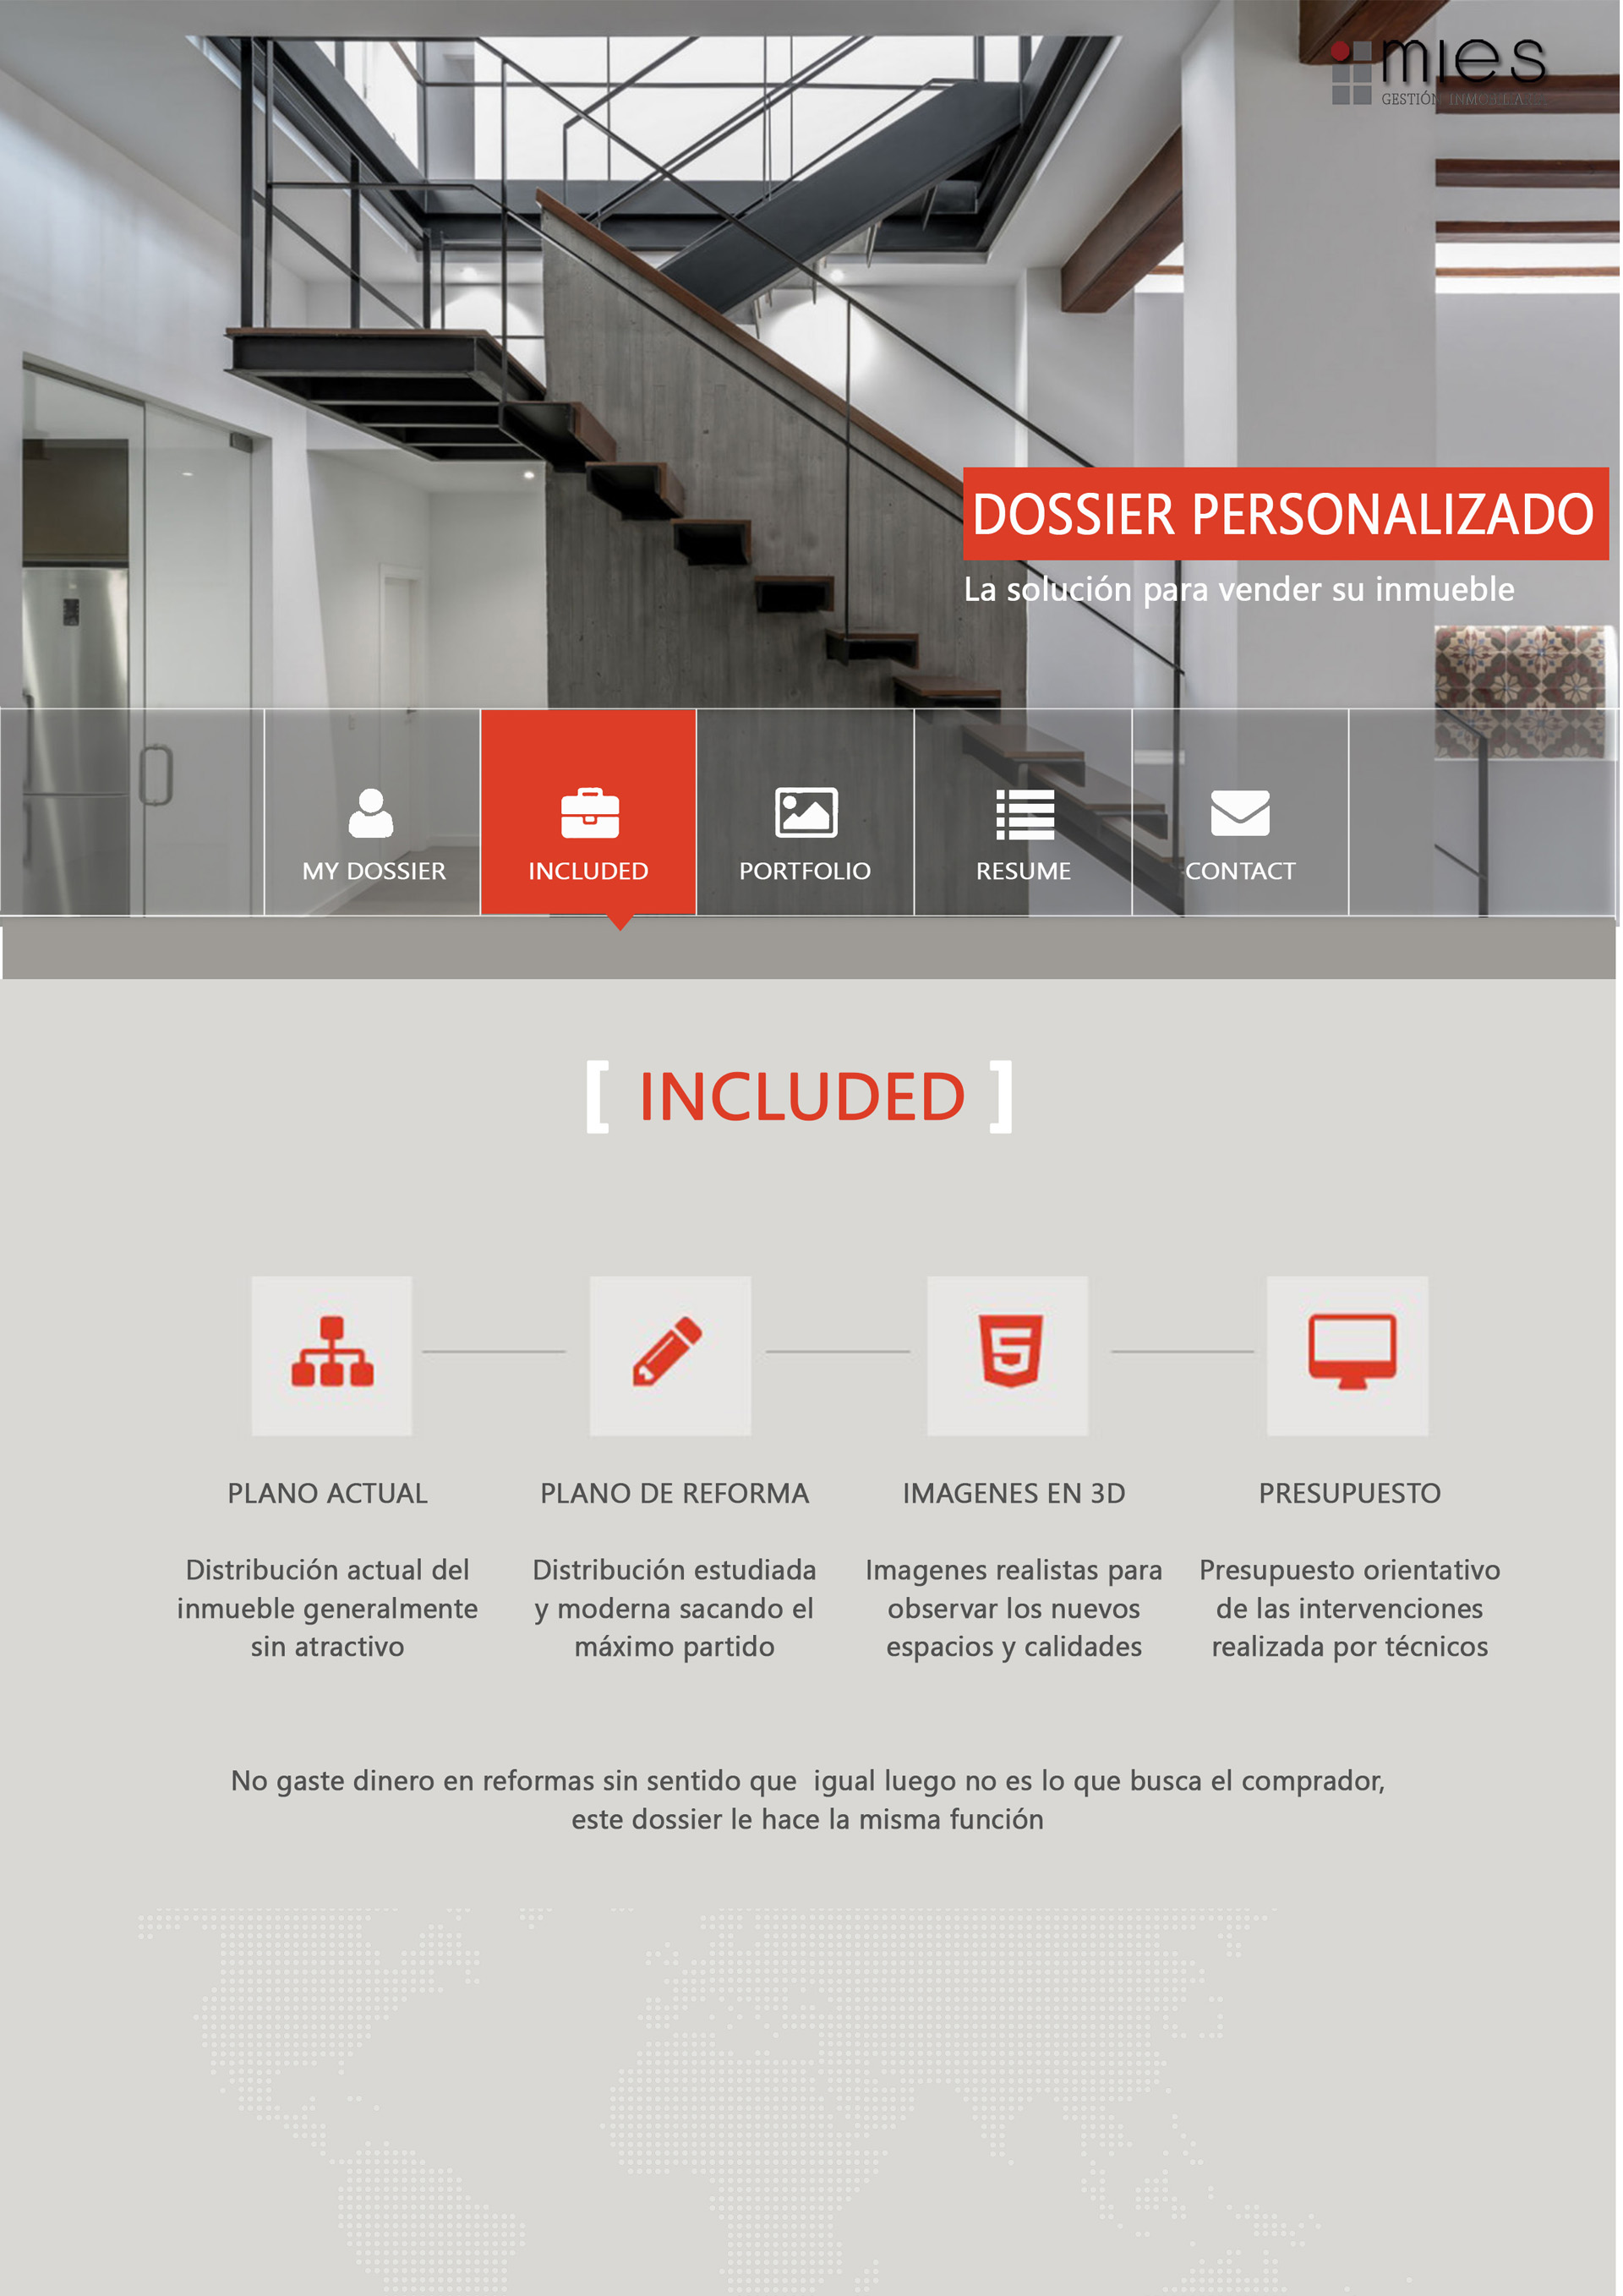 Mies inmobiliaria - Included